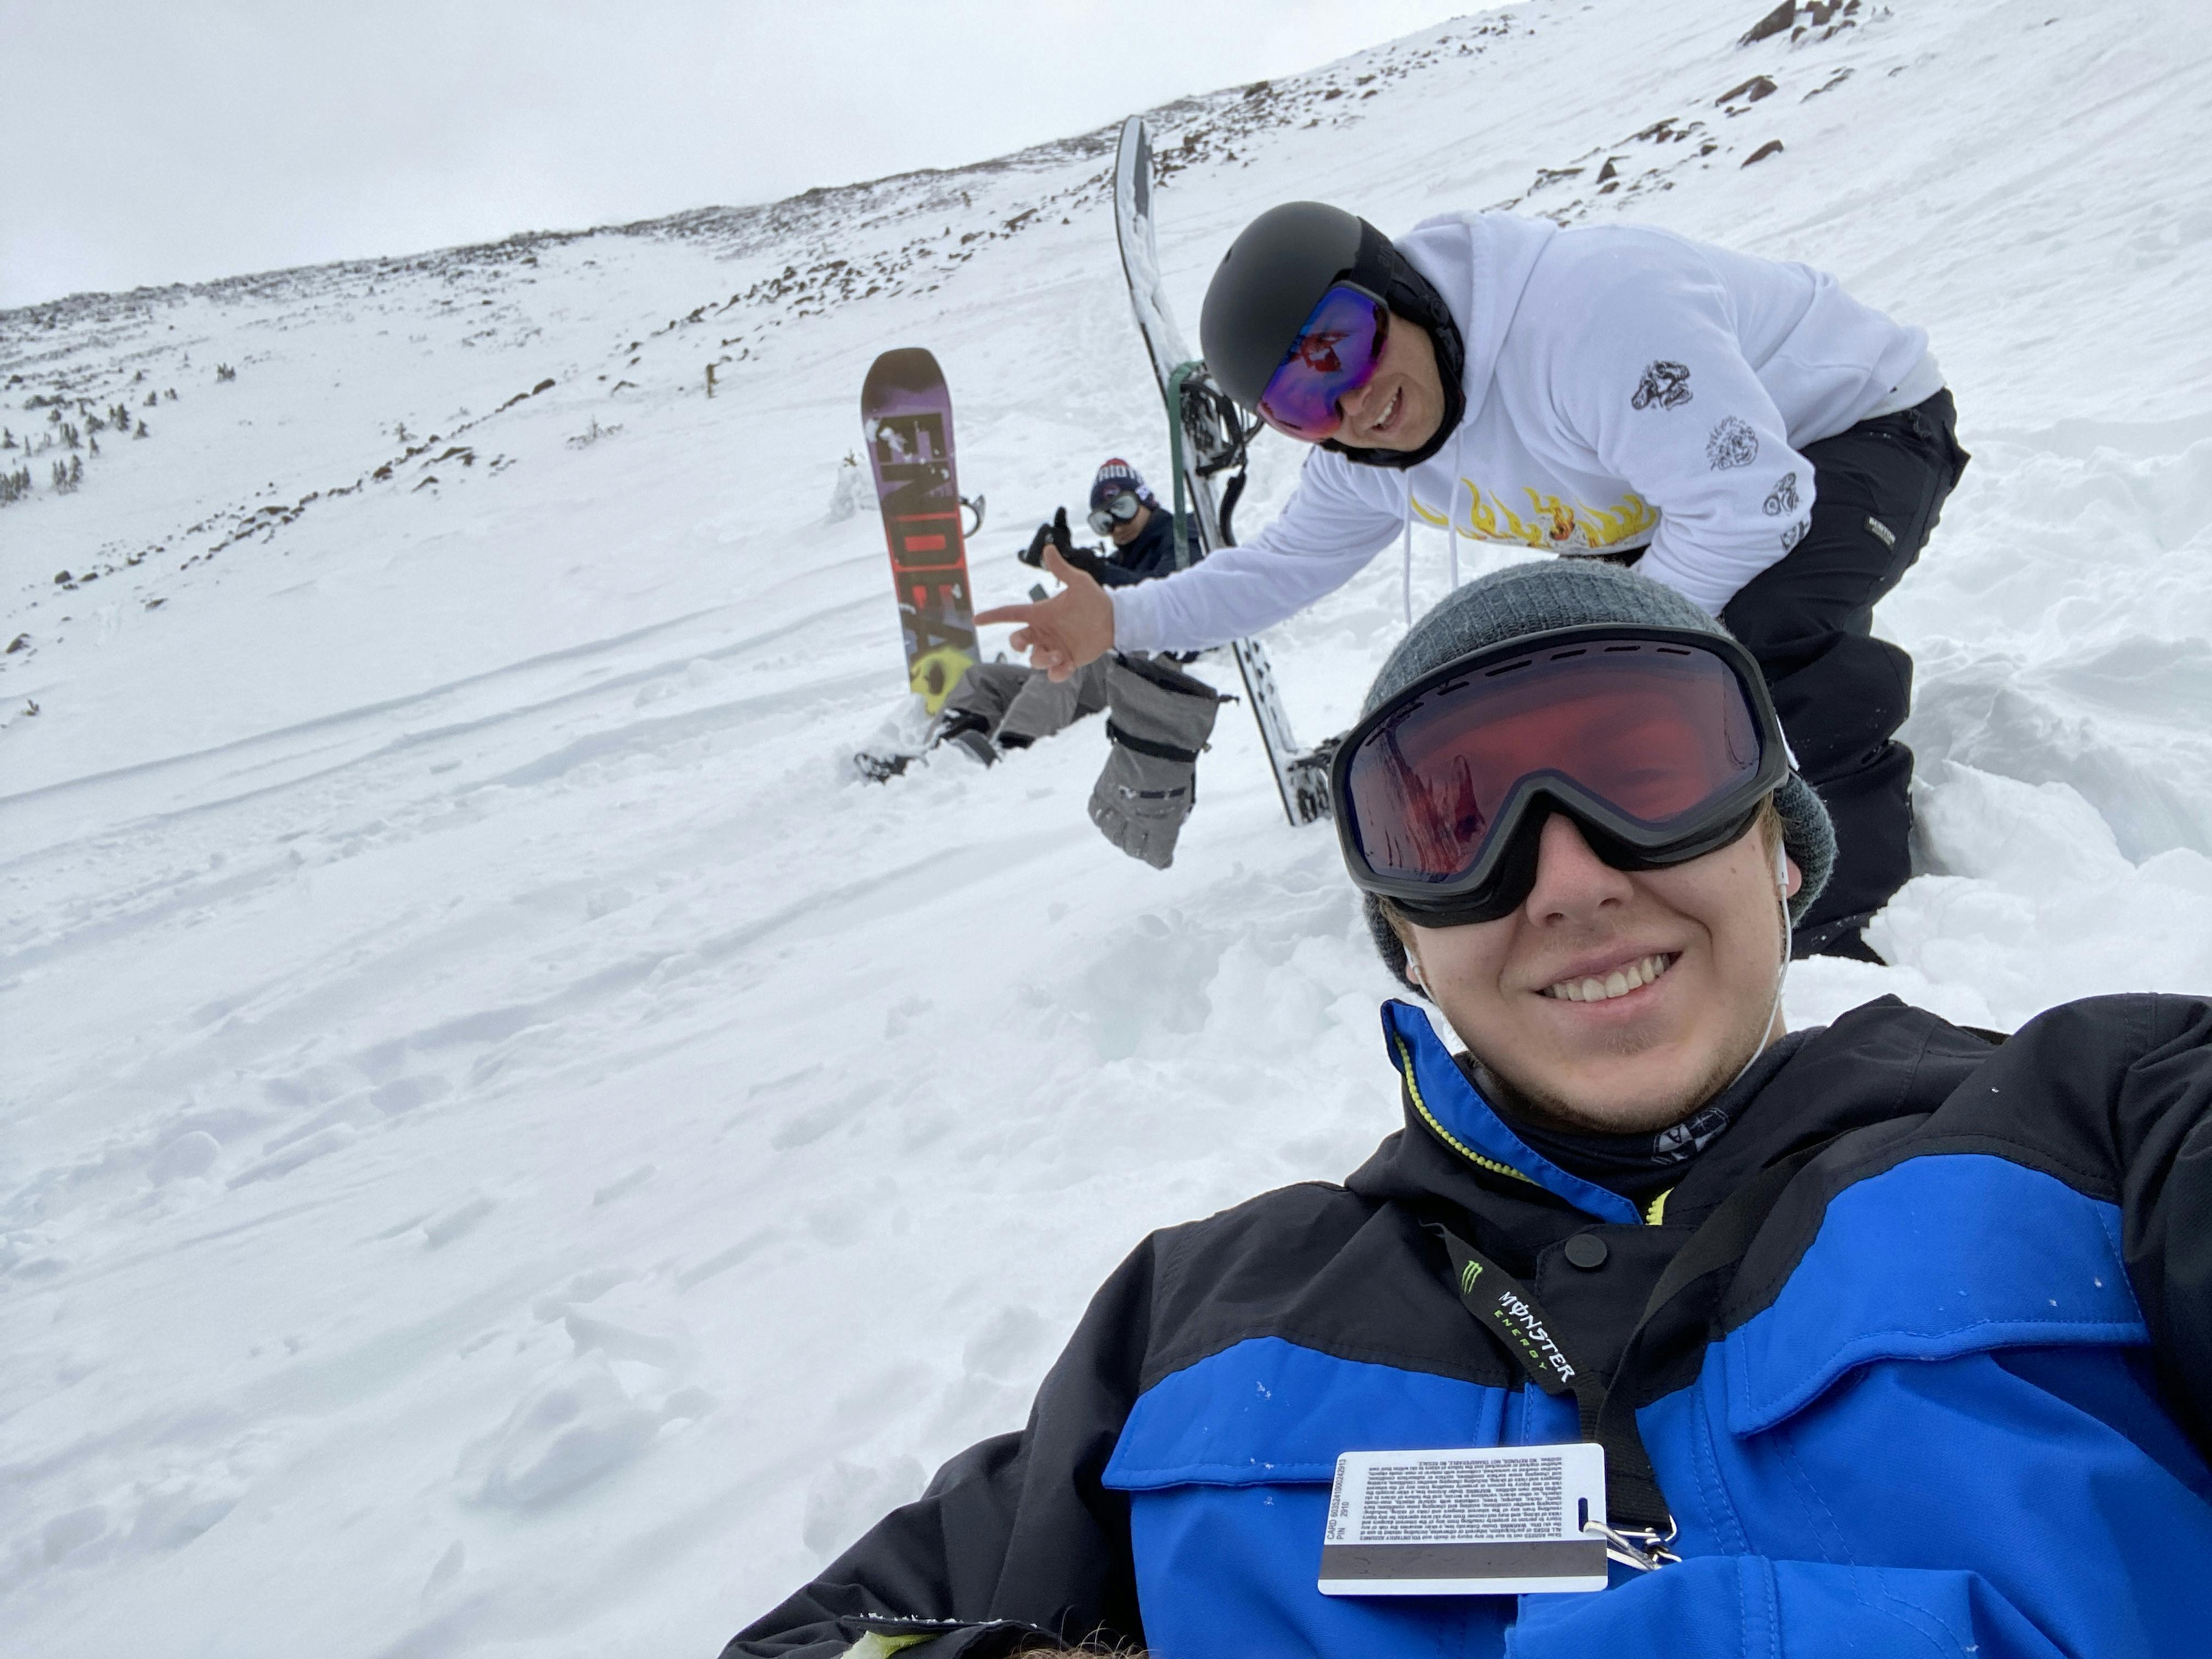 Two snowboarders with a snowy mountain in the background.